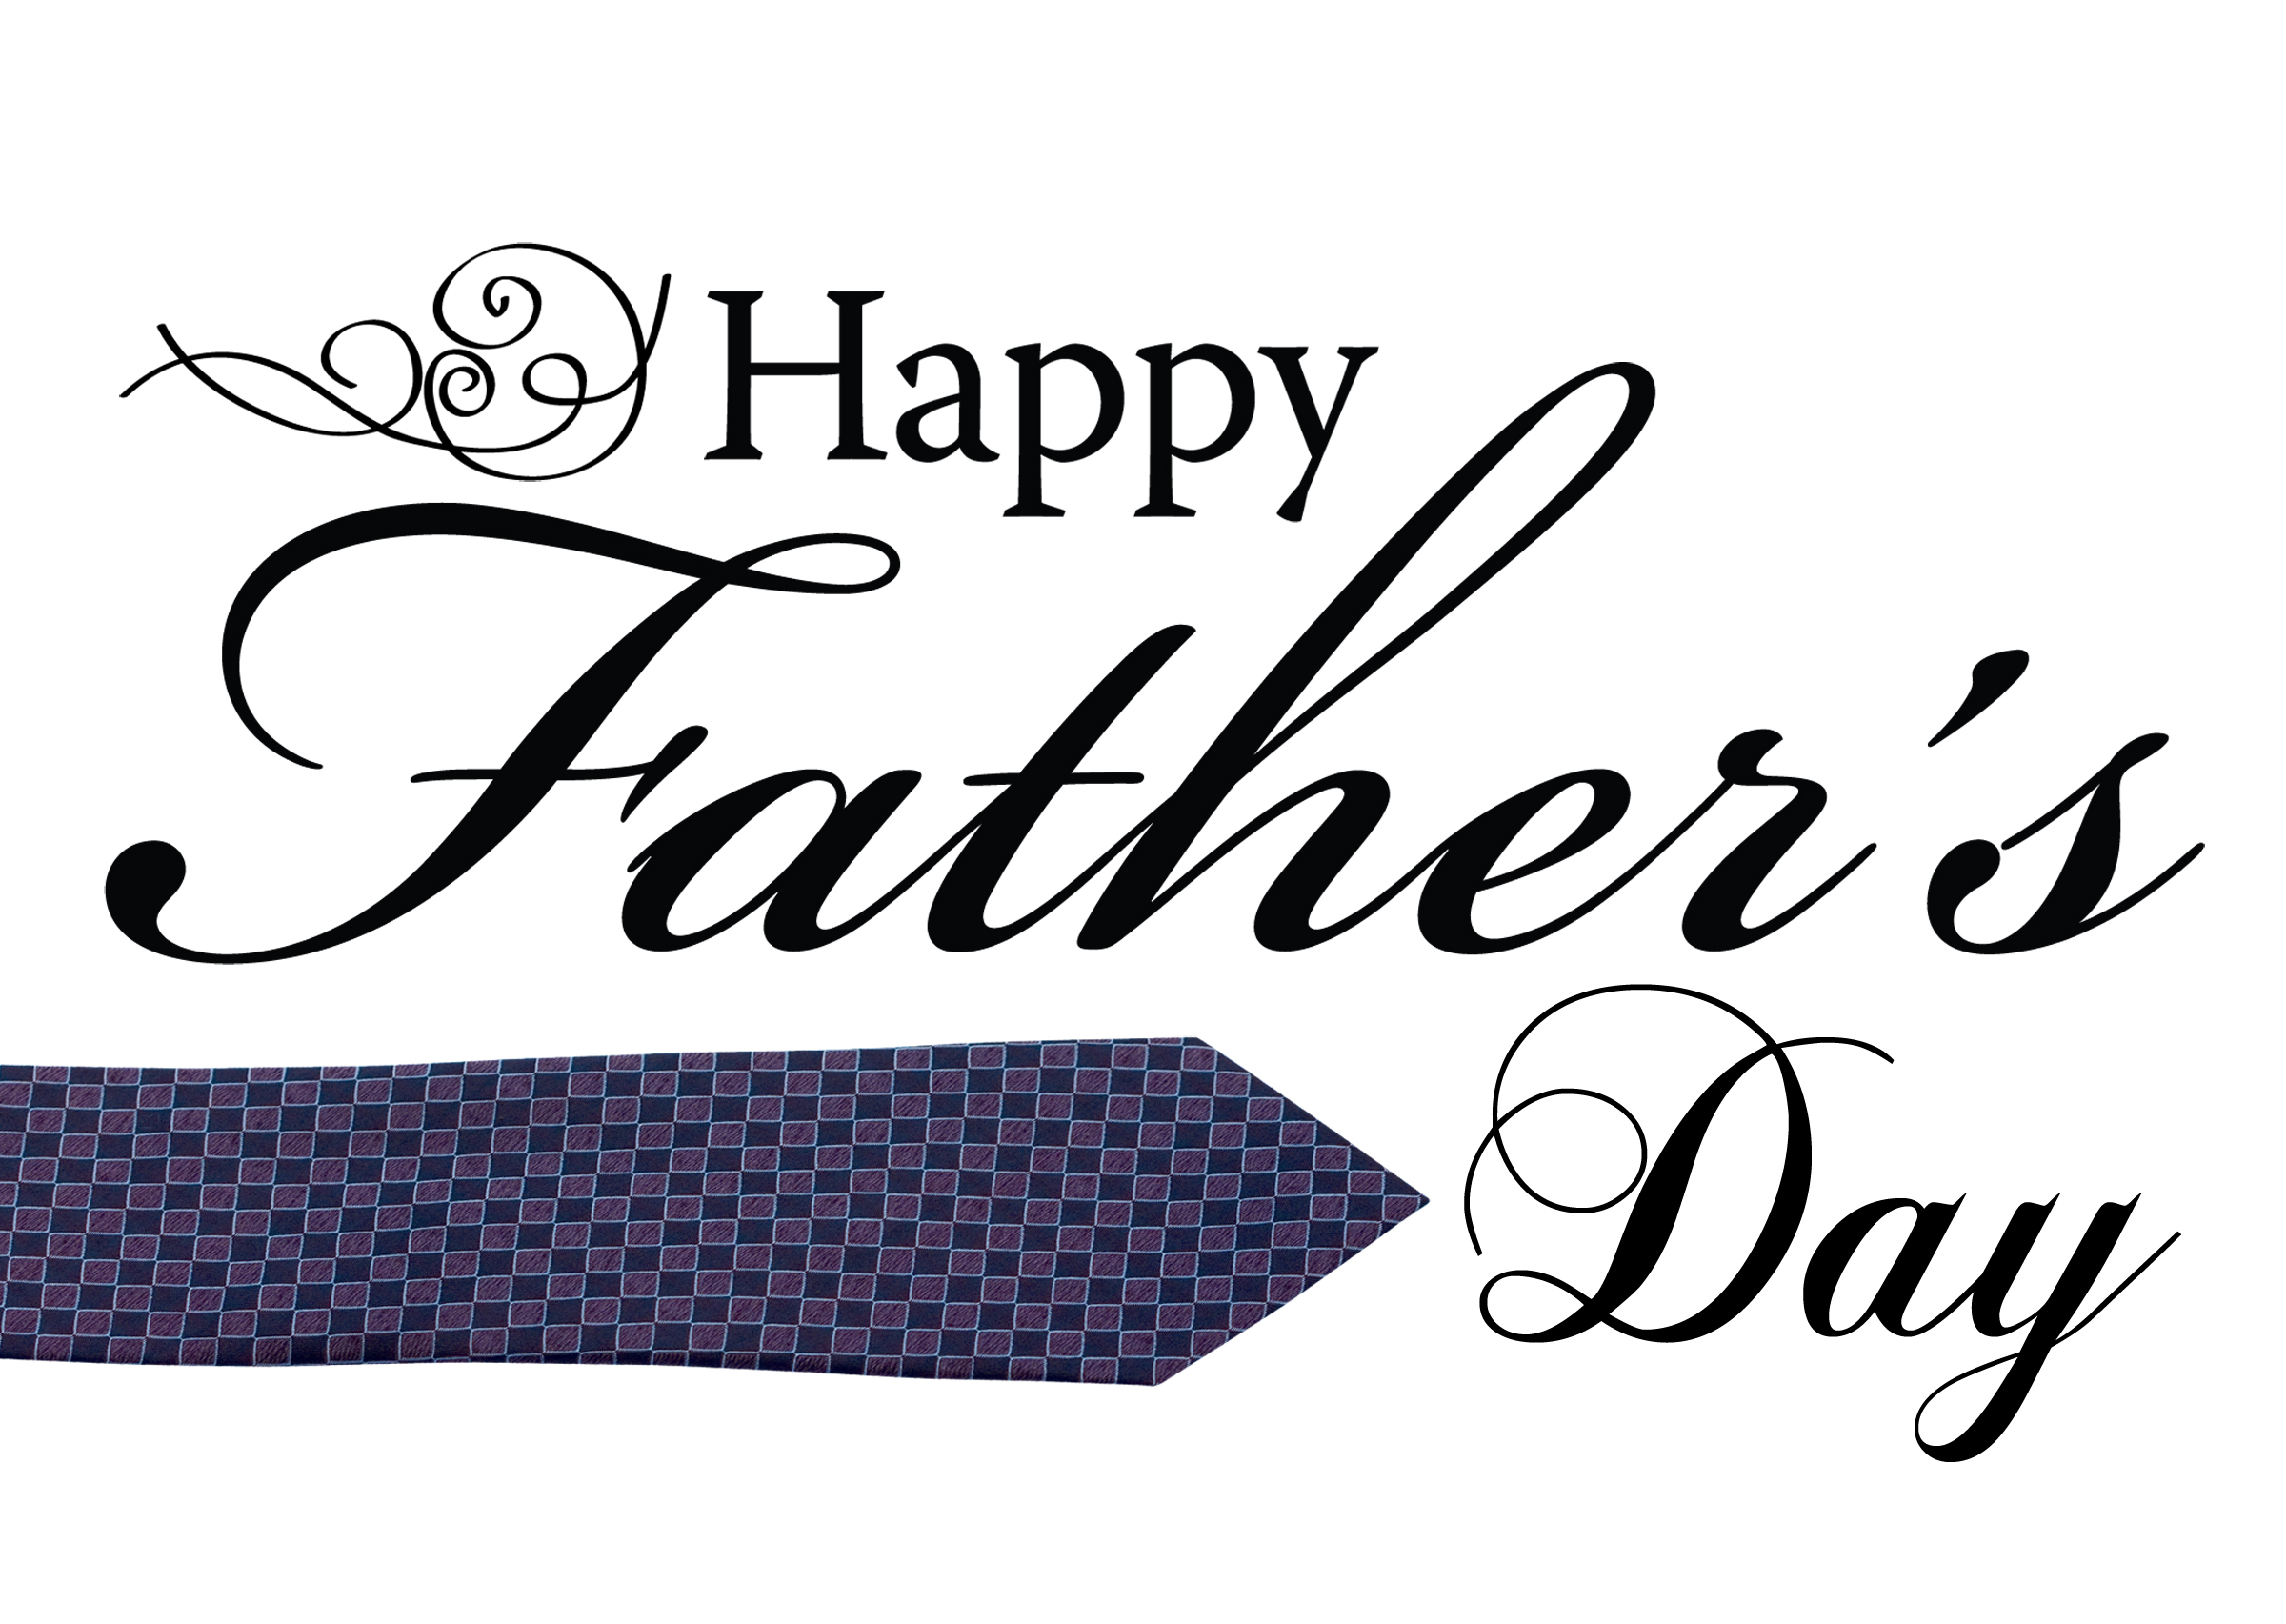 HD desktop wallpaper of Father's Day featuring elegant script with Happy Father's Day text and a stylized necktie graphic.